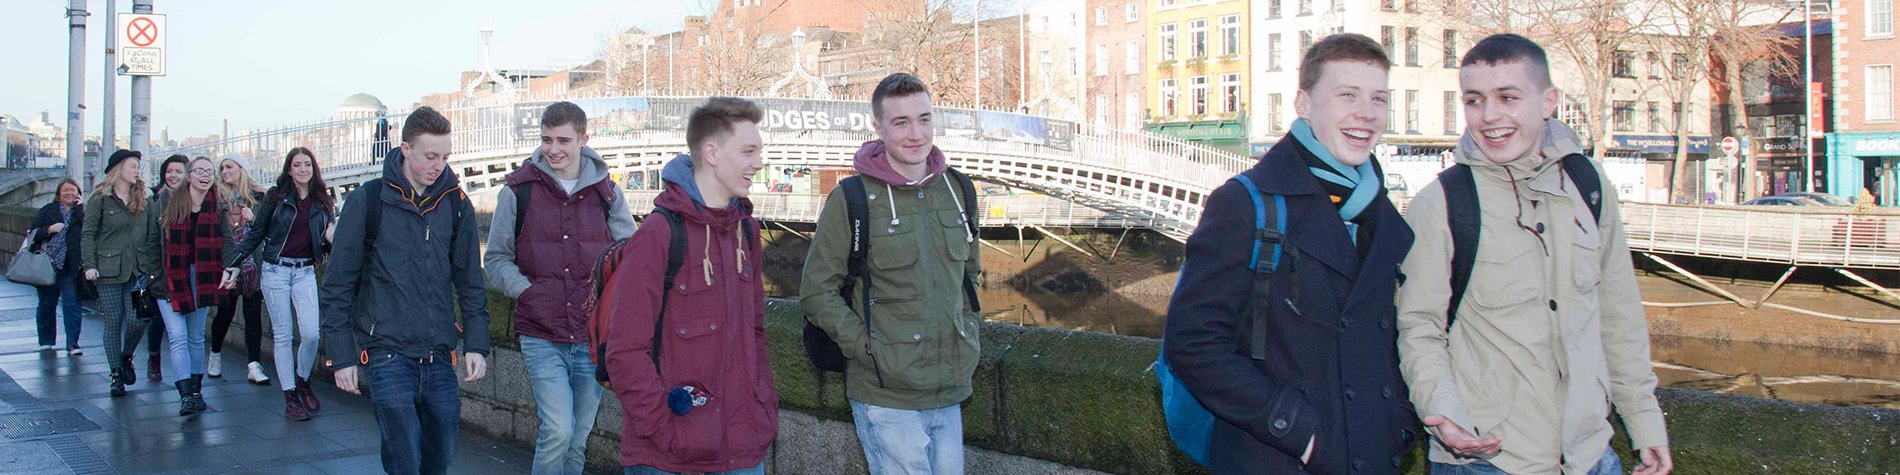 Group of students - Traveling in Ireland